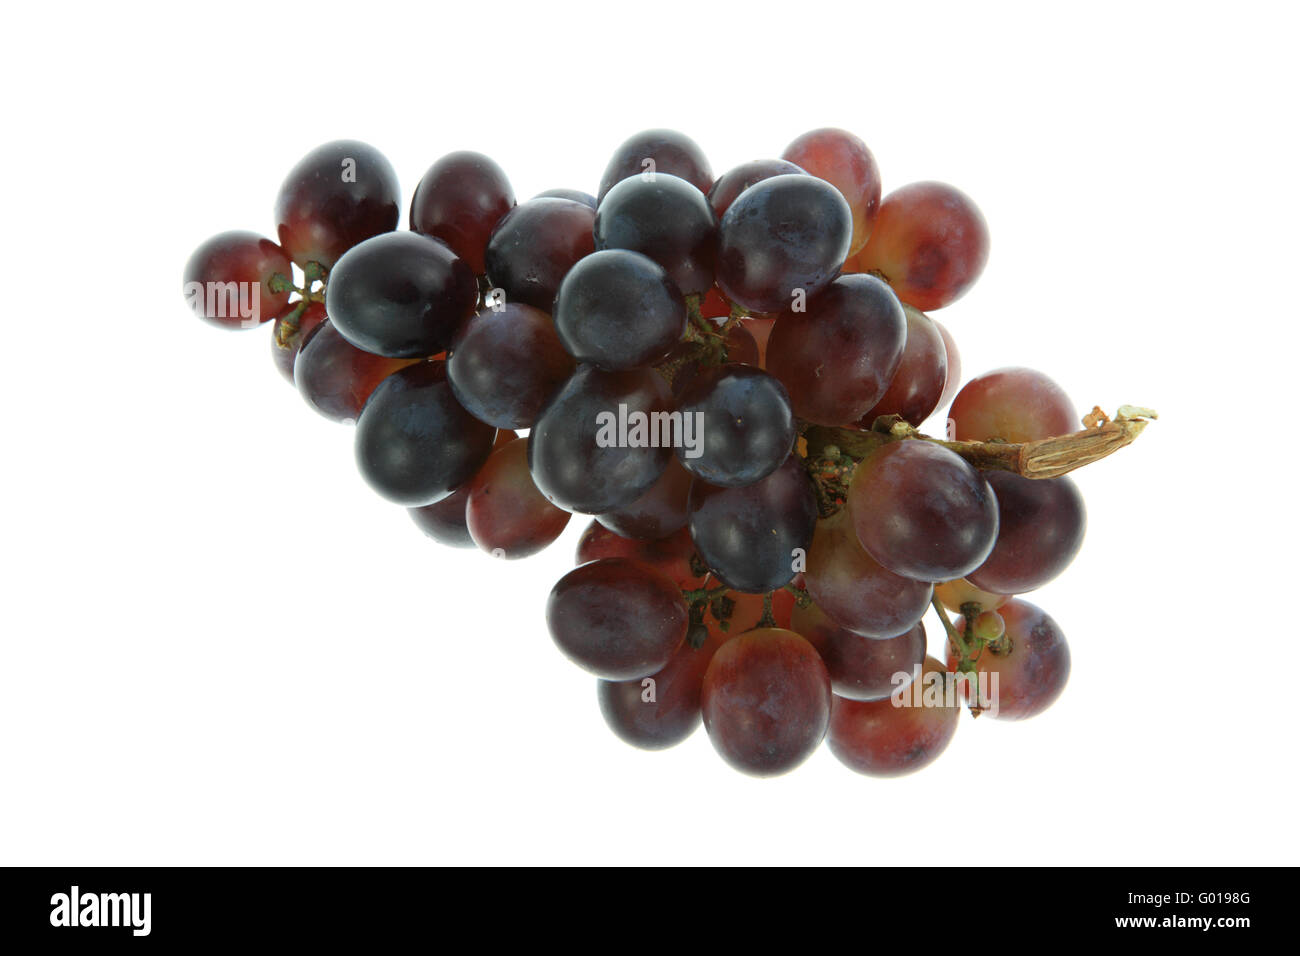 Red grapes. Stock Photo